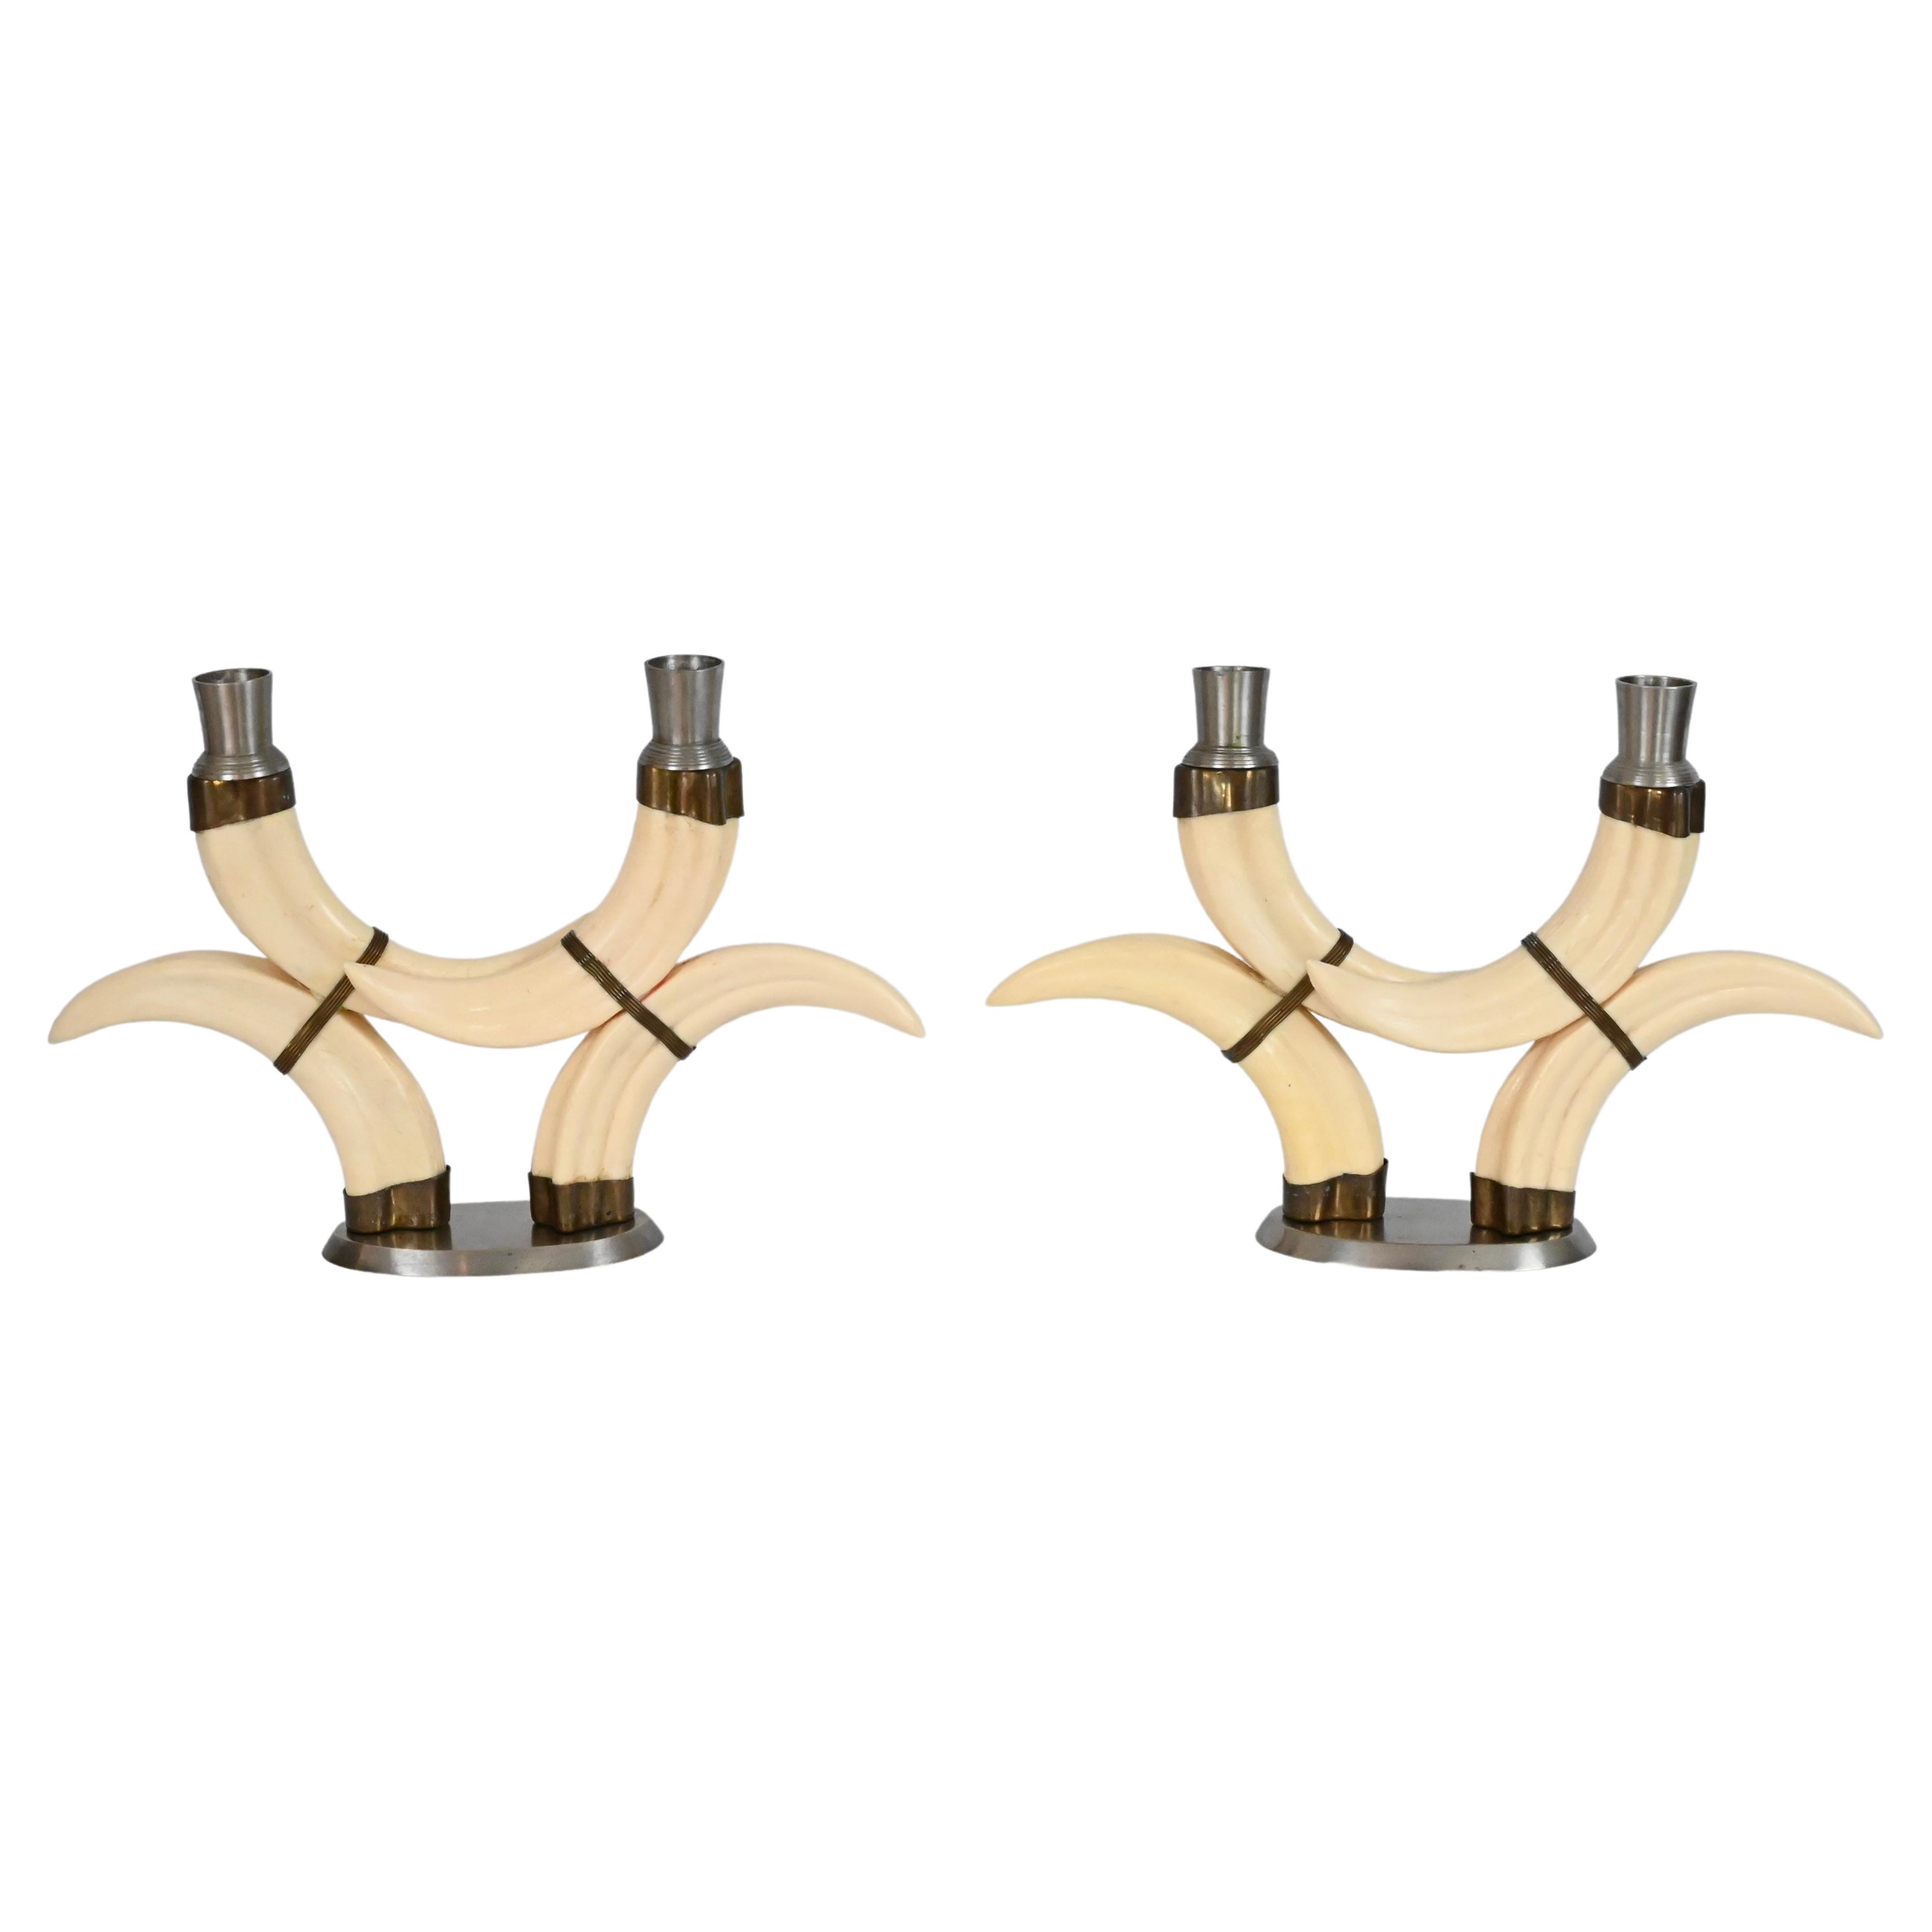 Pair of Beige Faux Horn Candlesticks Mounted in Nickel